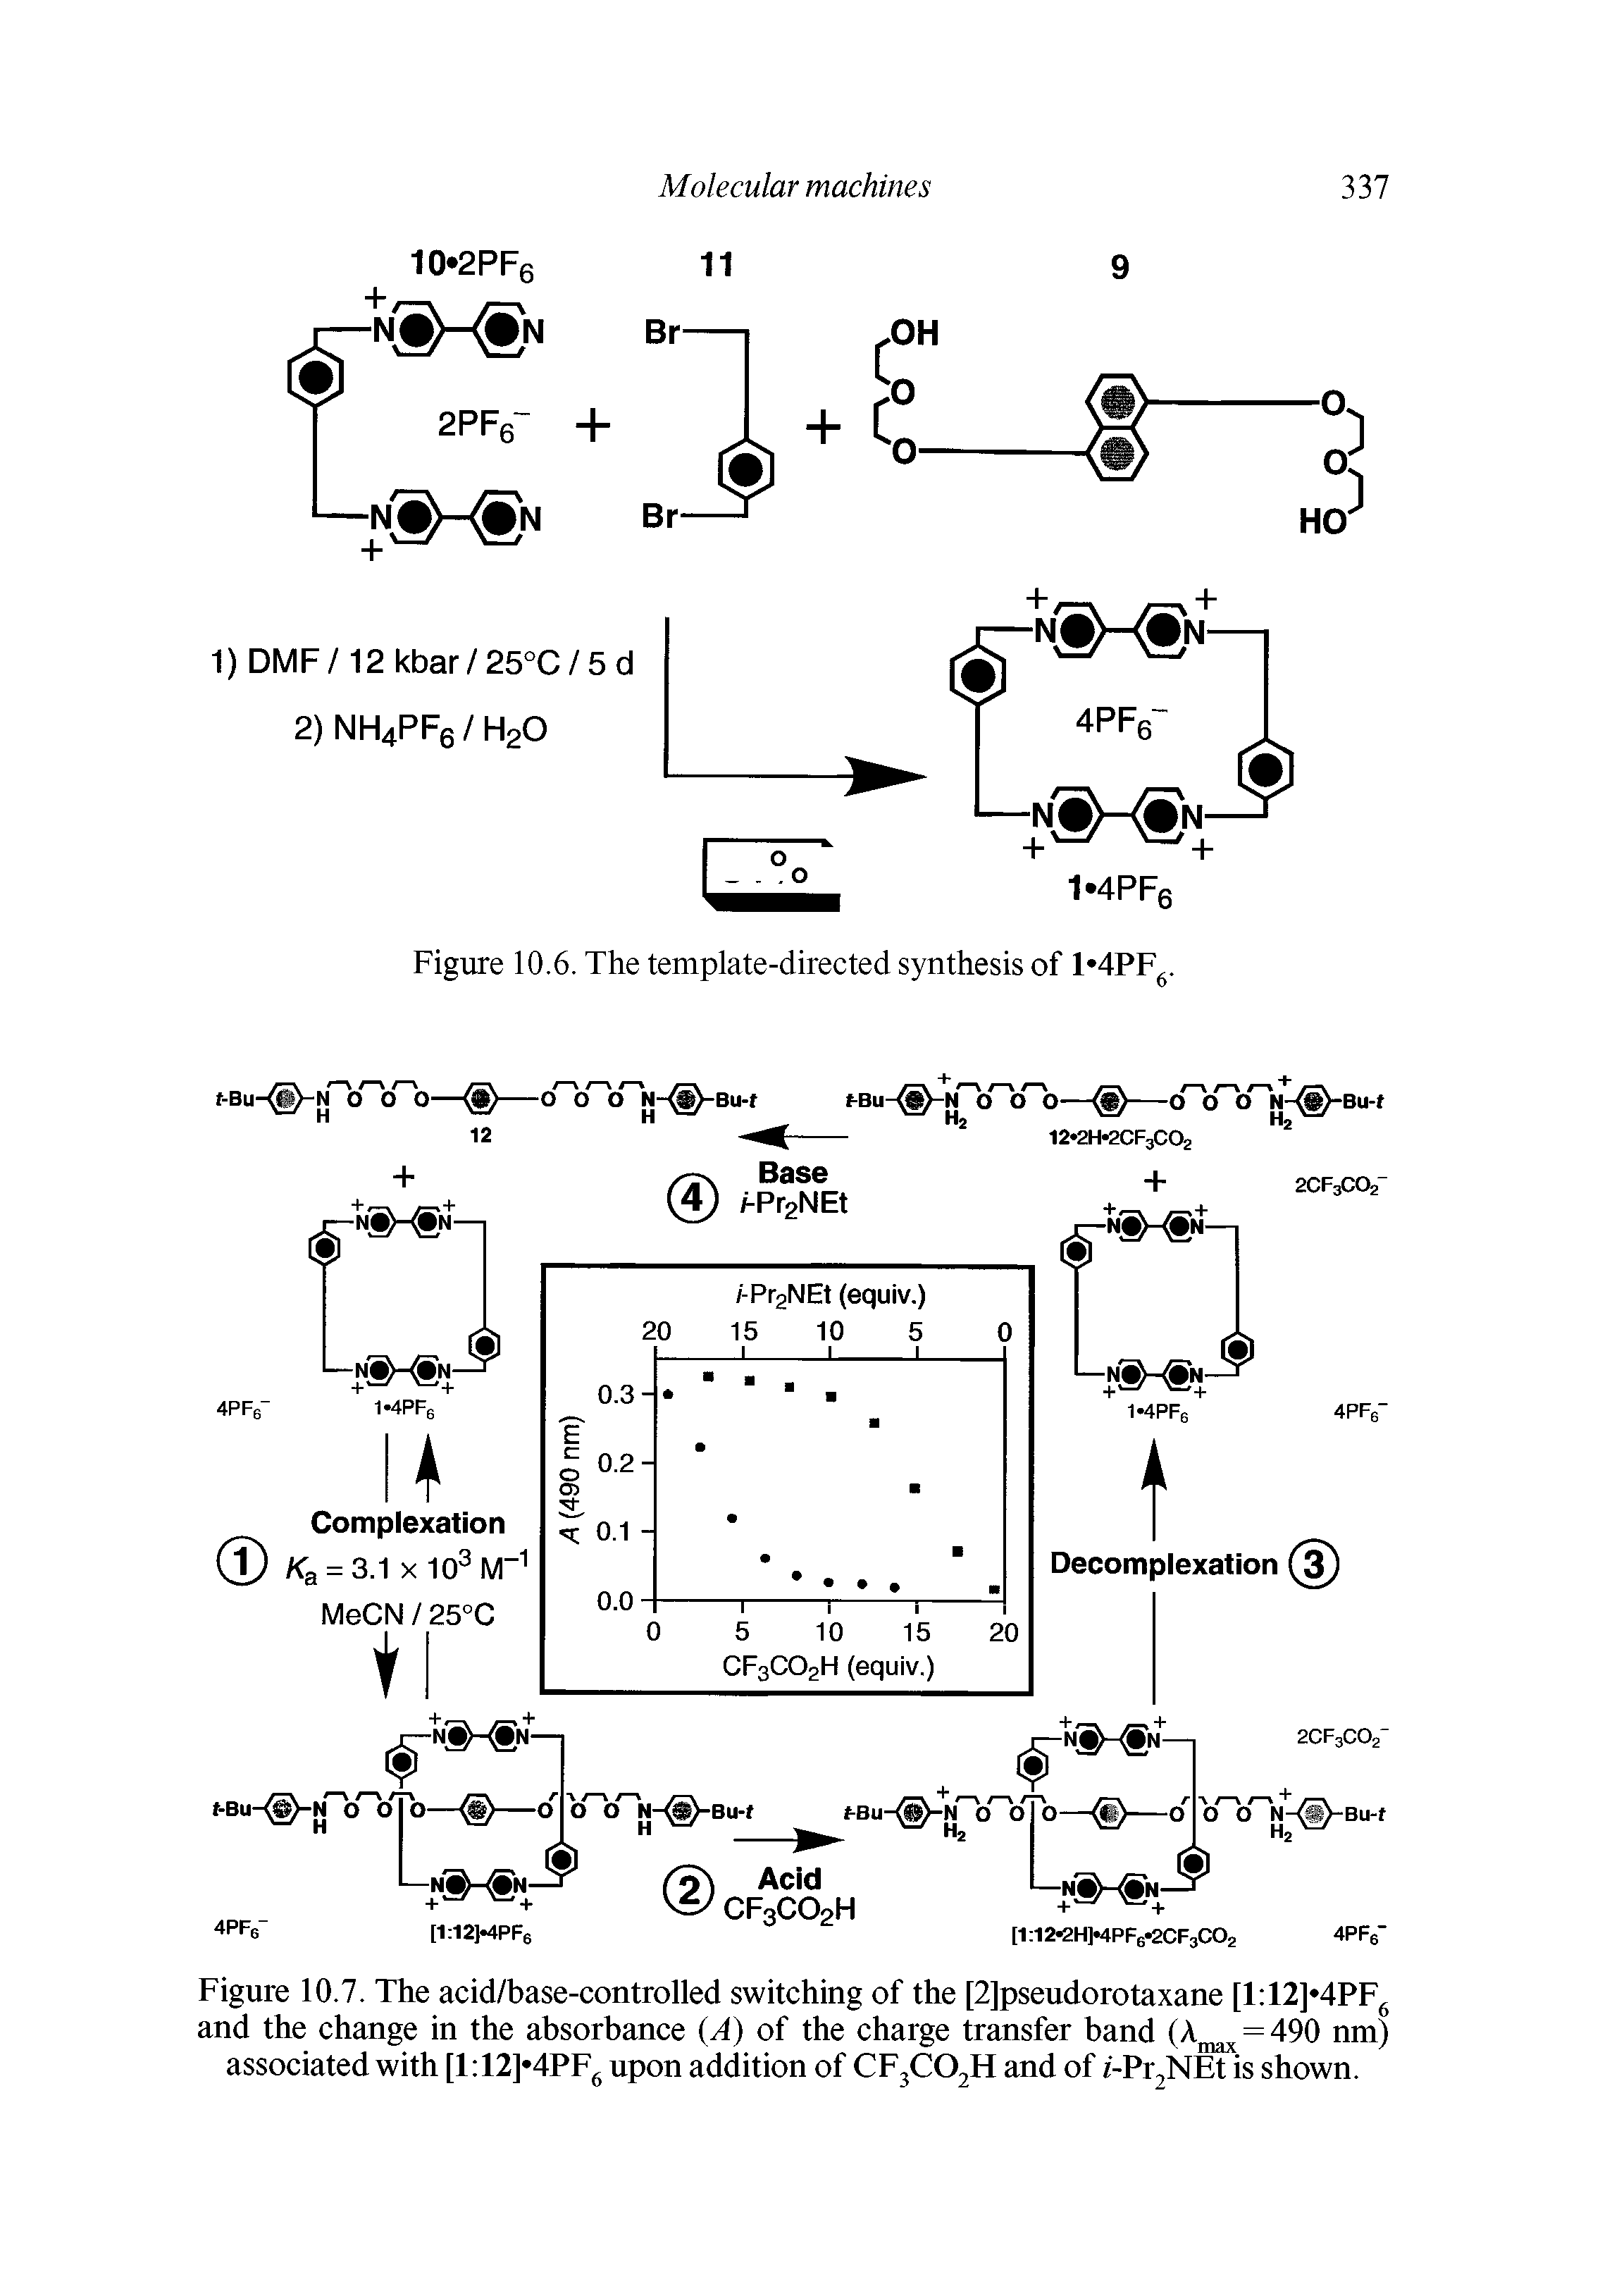 Figure 10.7. The acid/base-controlled switching of the [2]pseudorotaxane [1 12] 4PF6 and the change in the absorbance (A) of the charge transfer band (Amax = 490 nm) associated with [1 12] 4PF6 upon addition of CF3C02H and of /-PpNEt is shown.